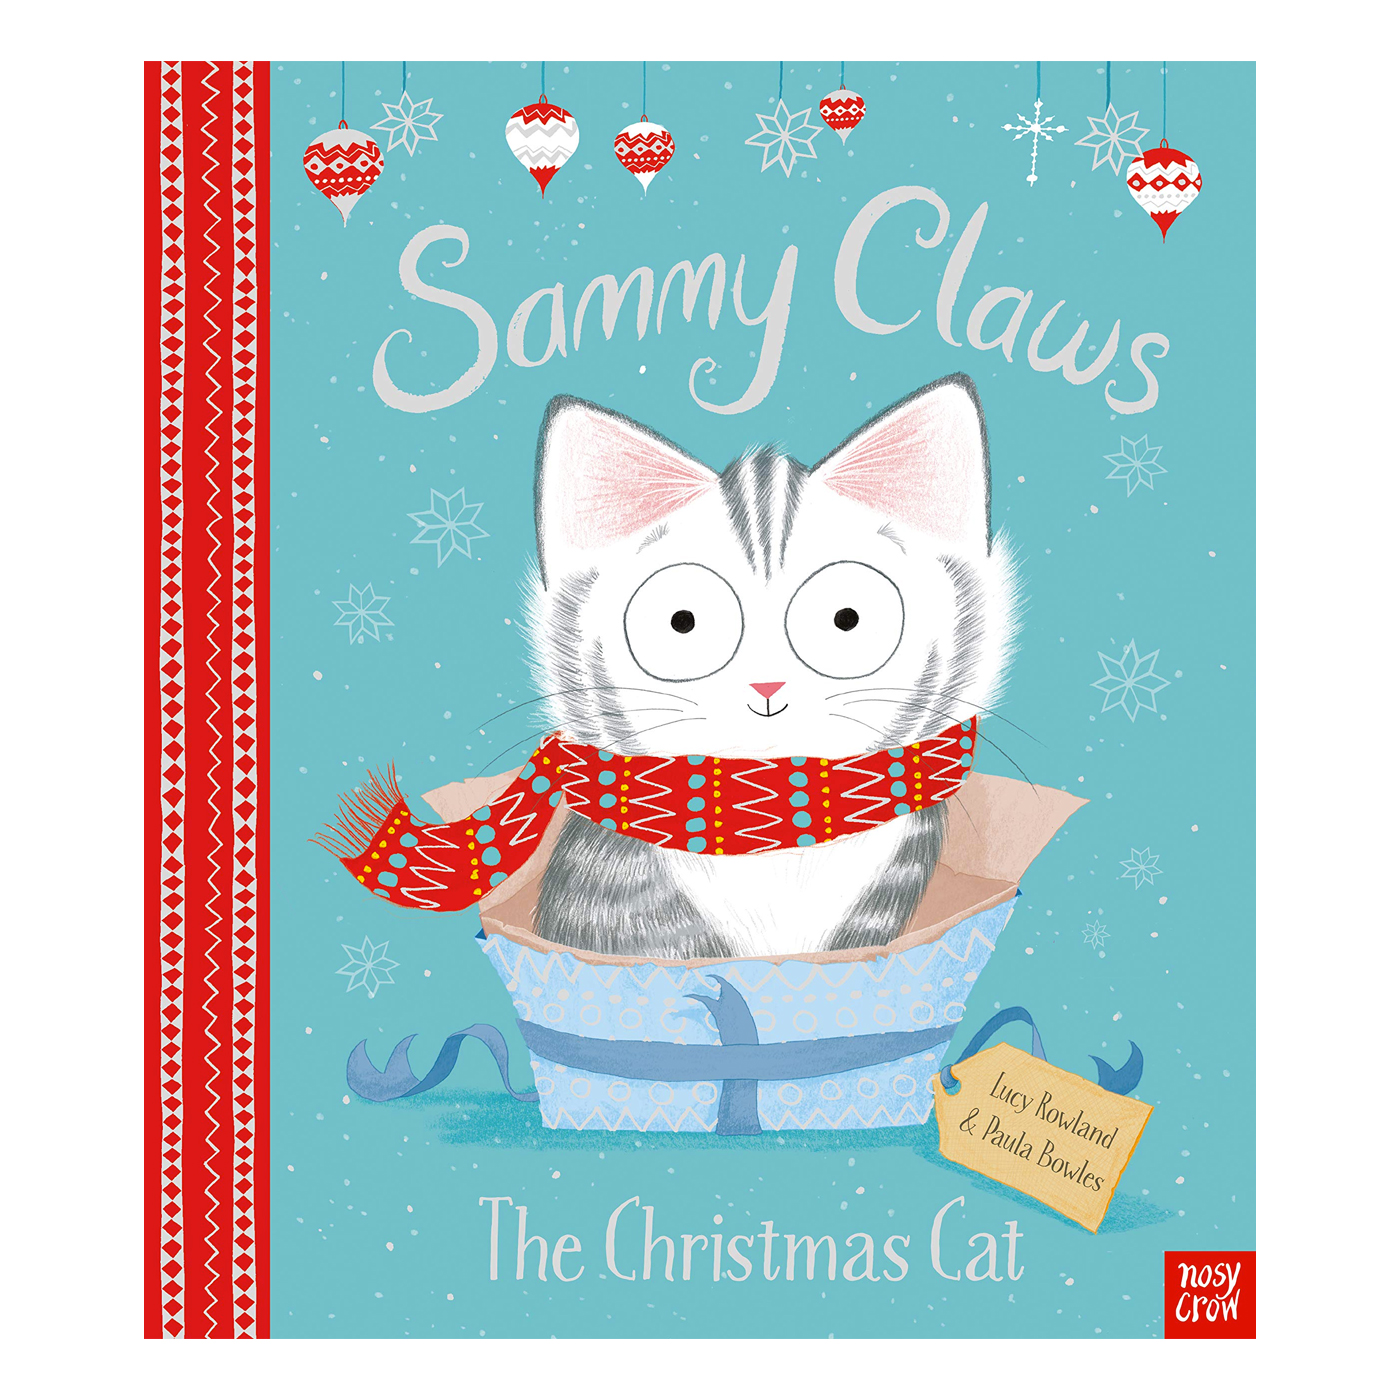  Sammy Claws the Christmas Cat